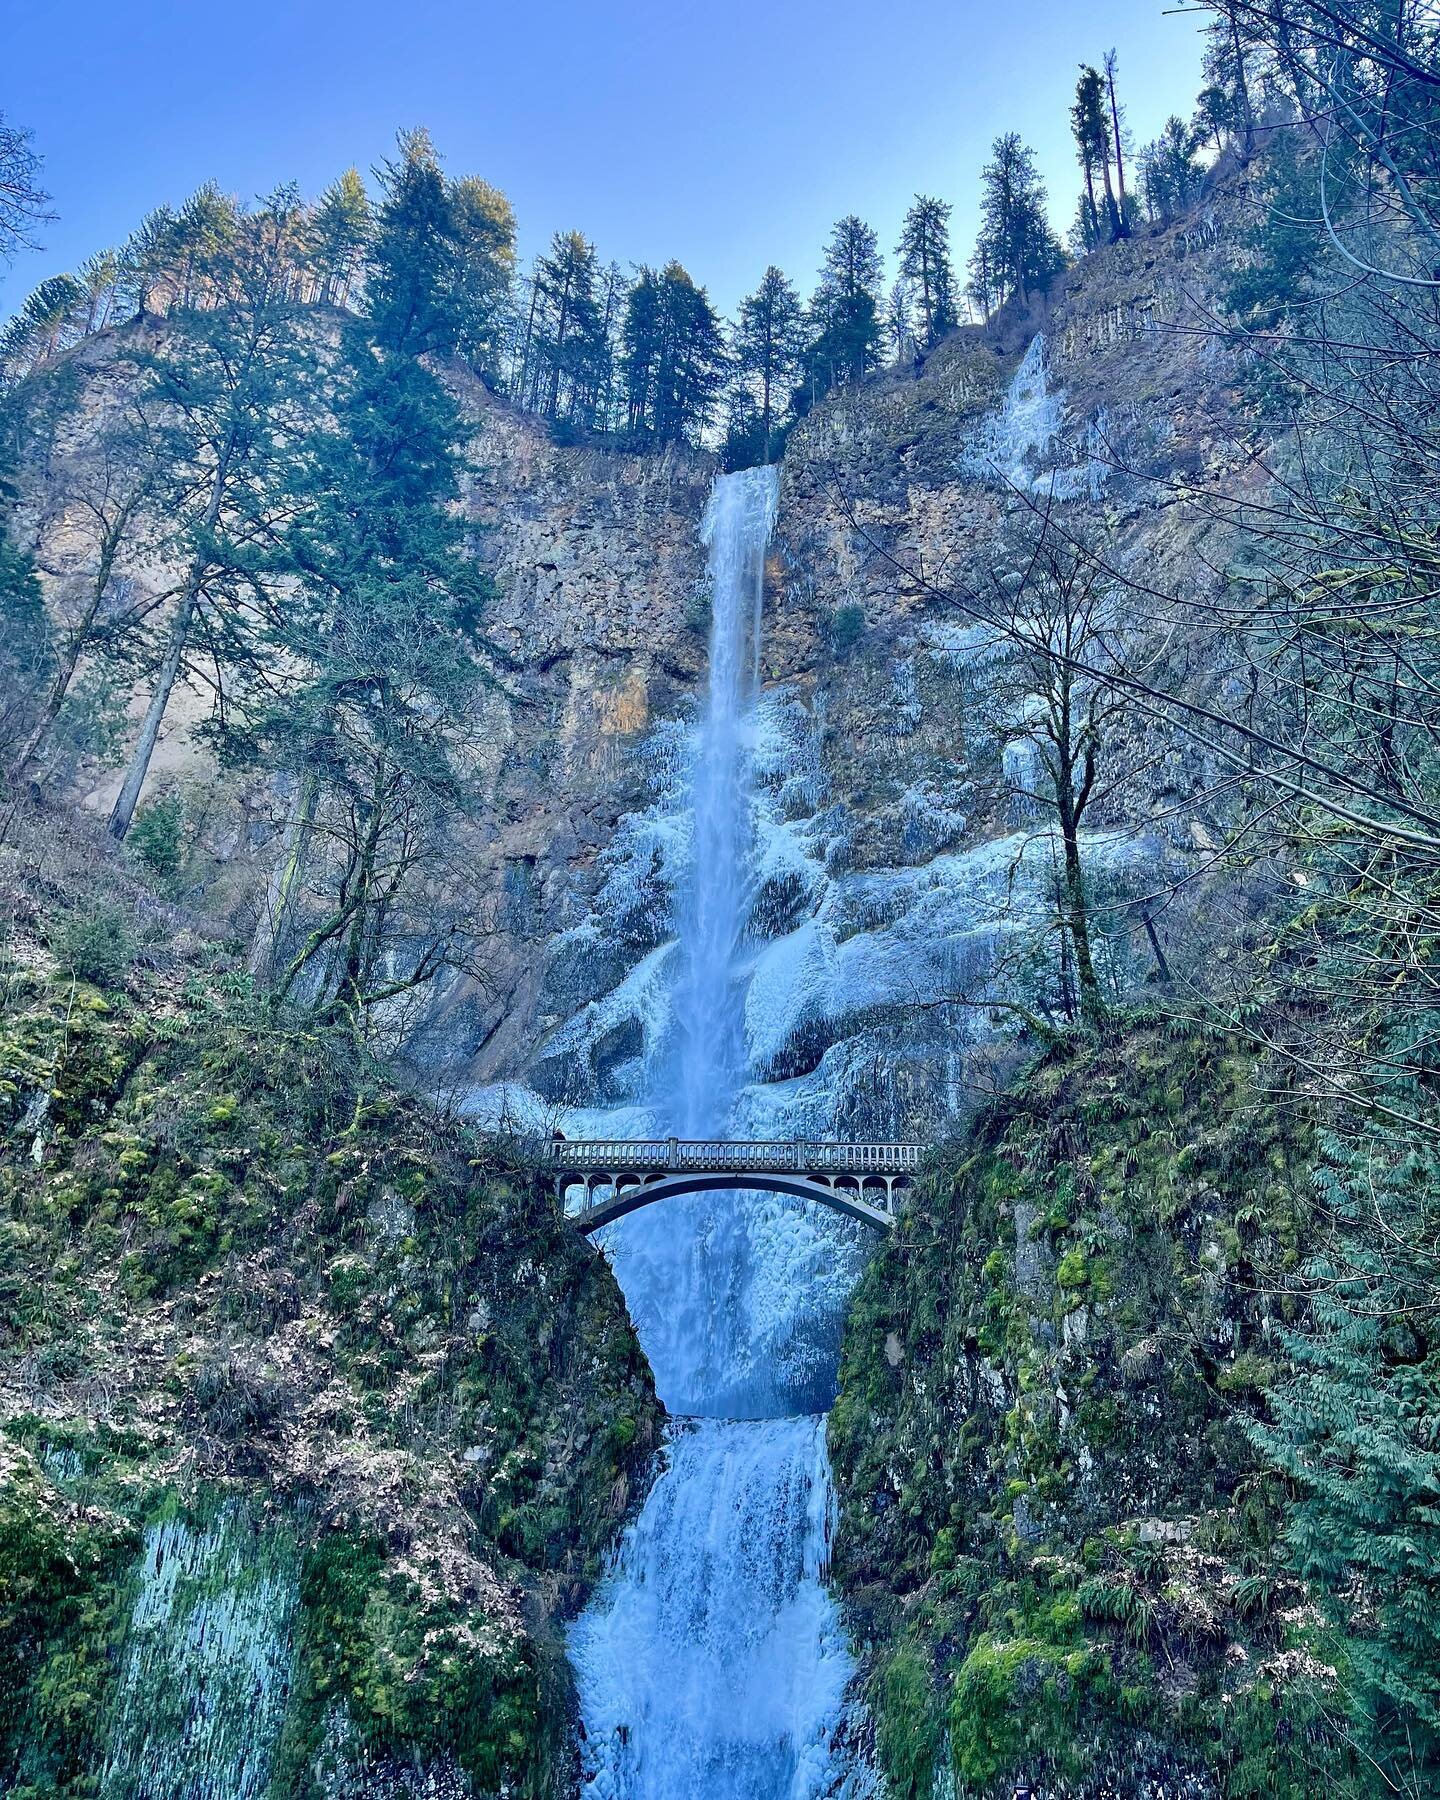 The last time I was at @multnomahfalls, I had just gotten my learner&rsquo;s permit, Bill Clinton was the president and one of the most memorable things was the fact that my dad and I went to a PNW restaurant chain, Shari&rsquo;s, three times in one 